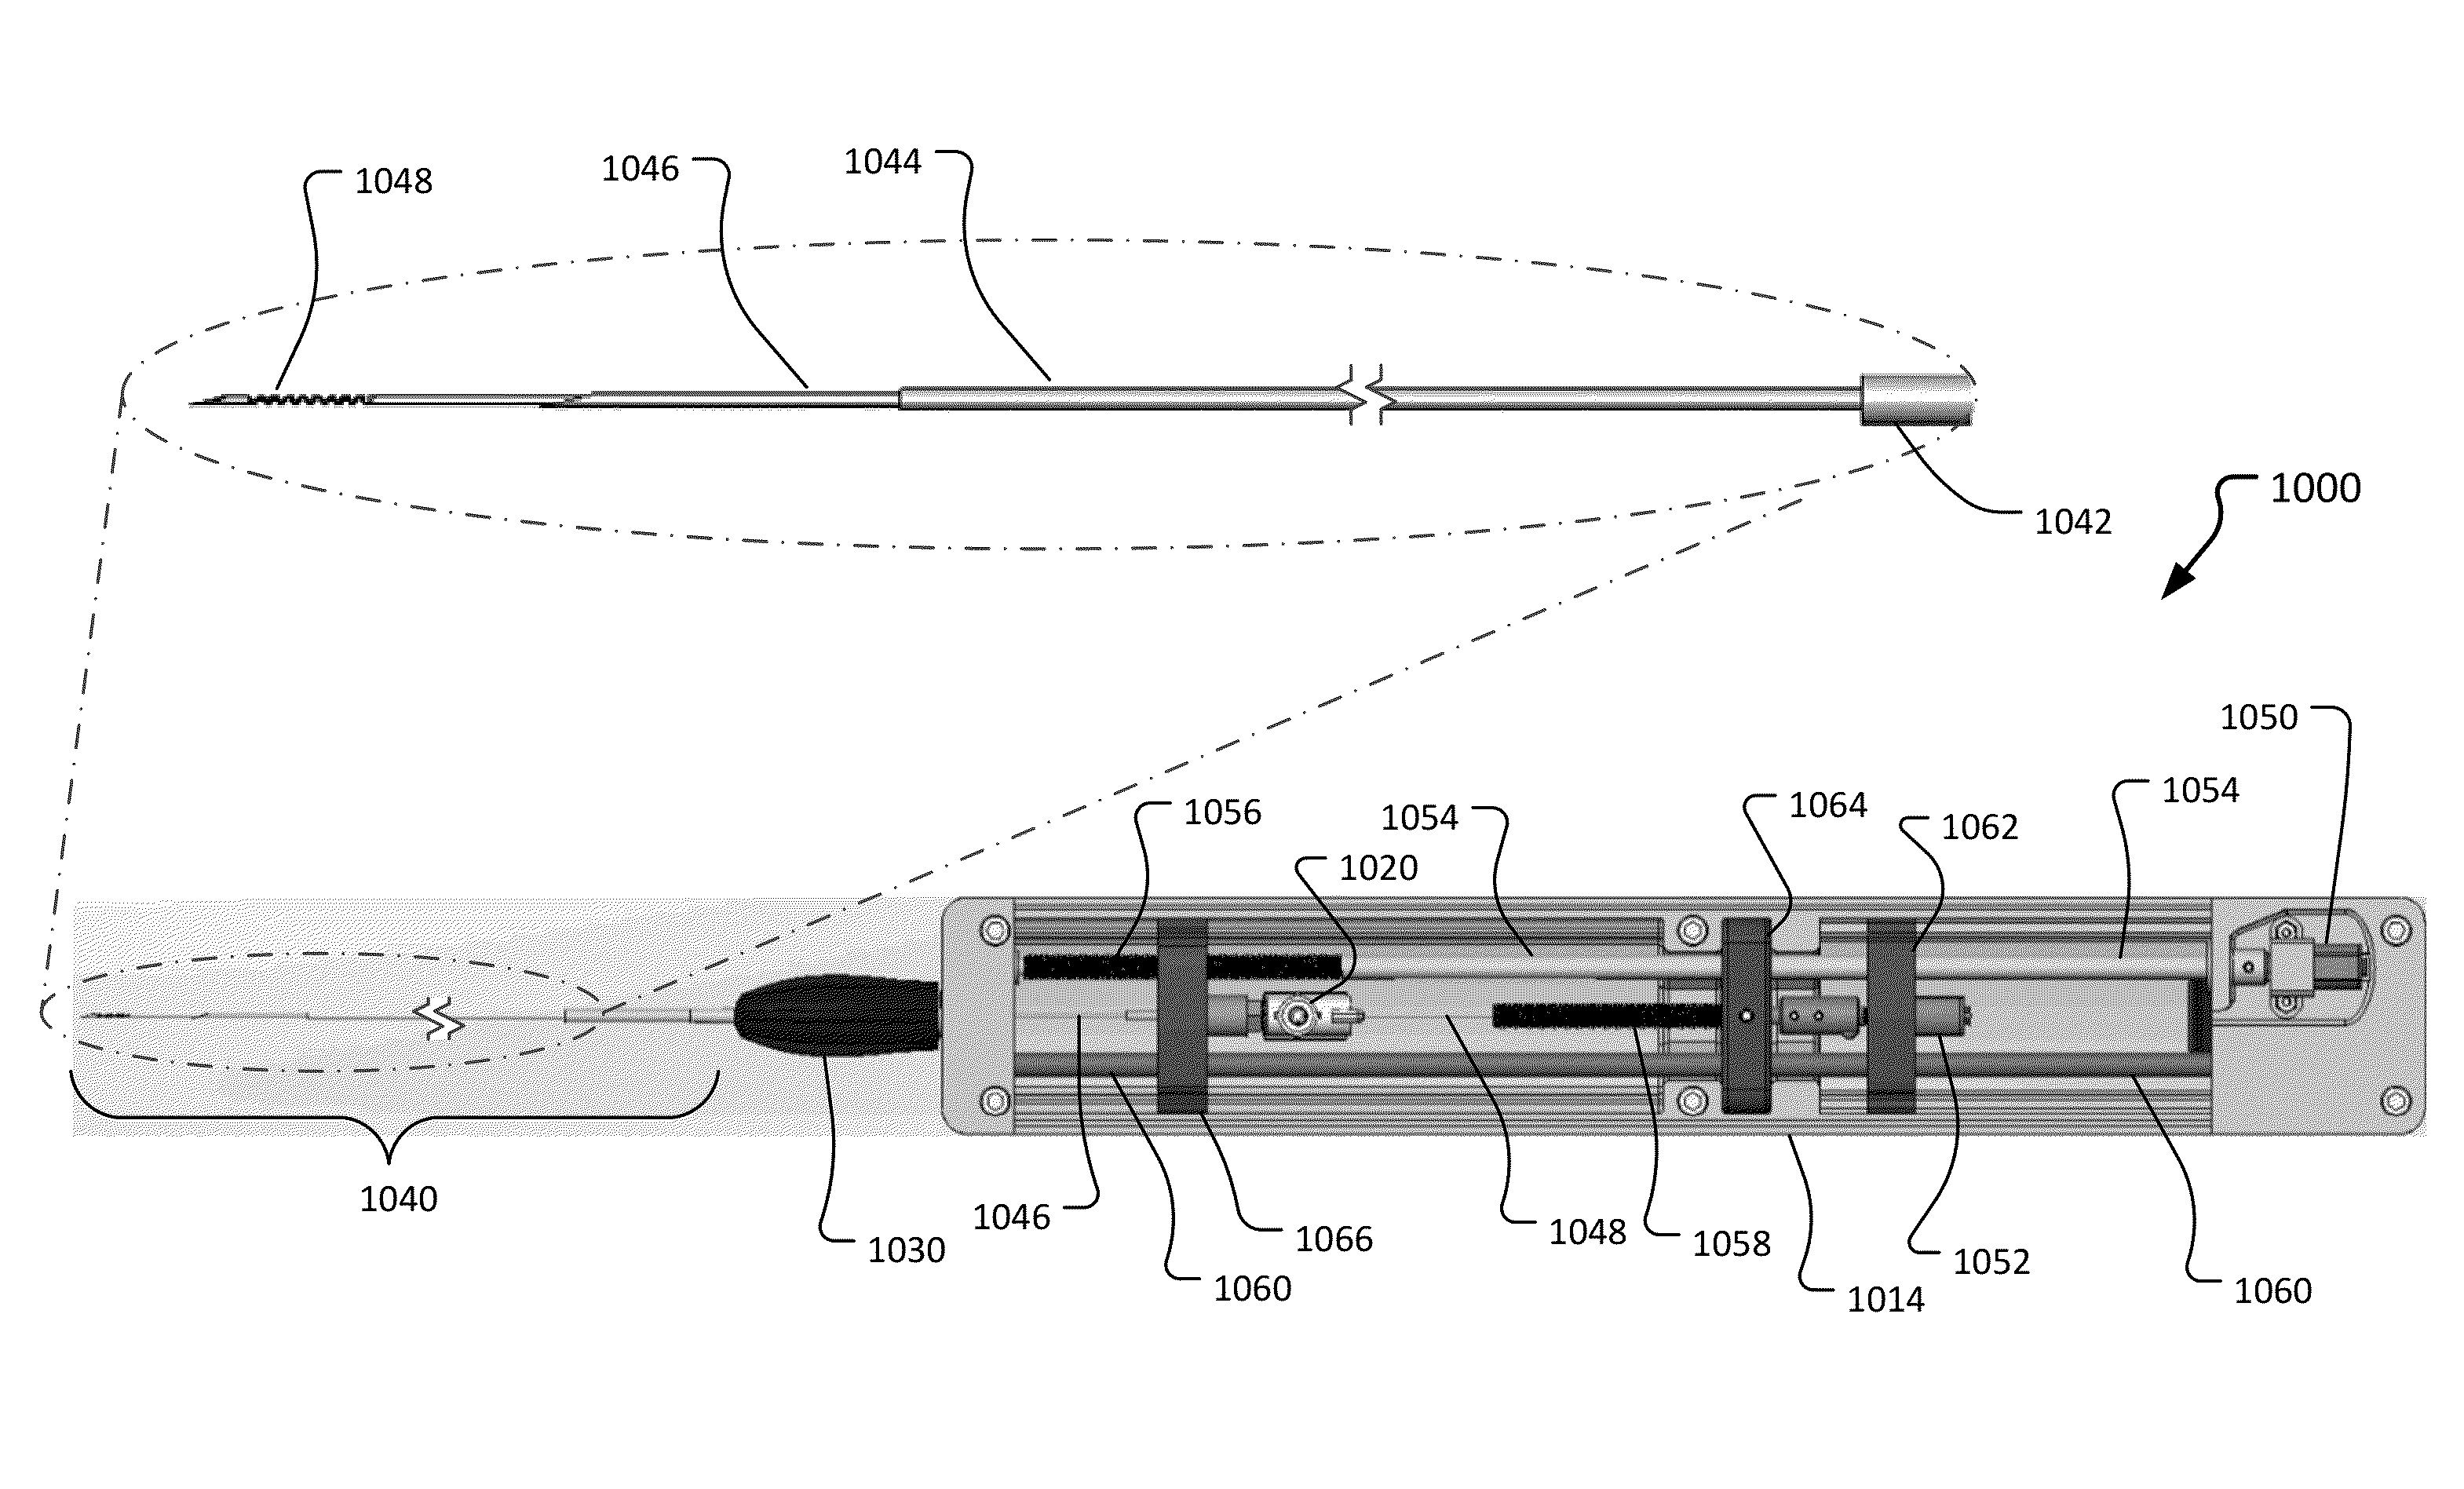 Needle biopsy systems and methods